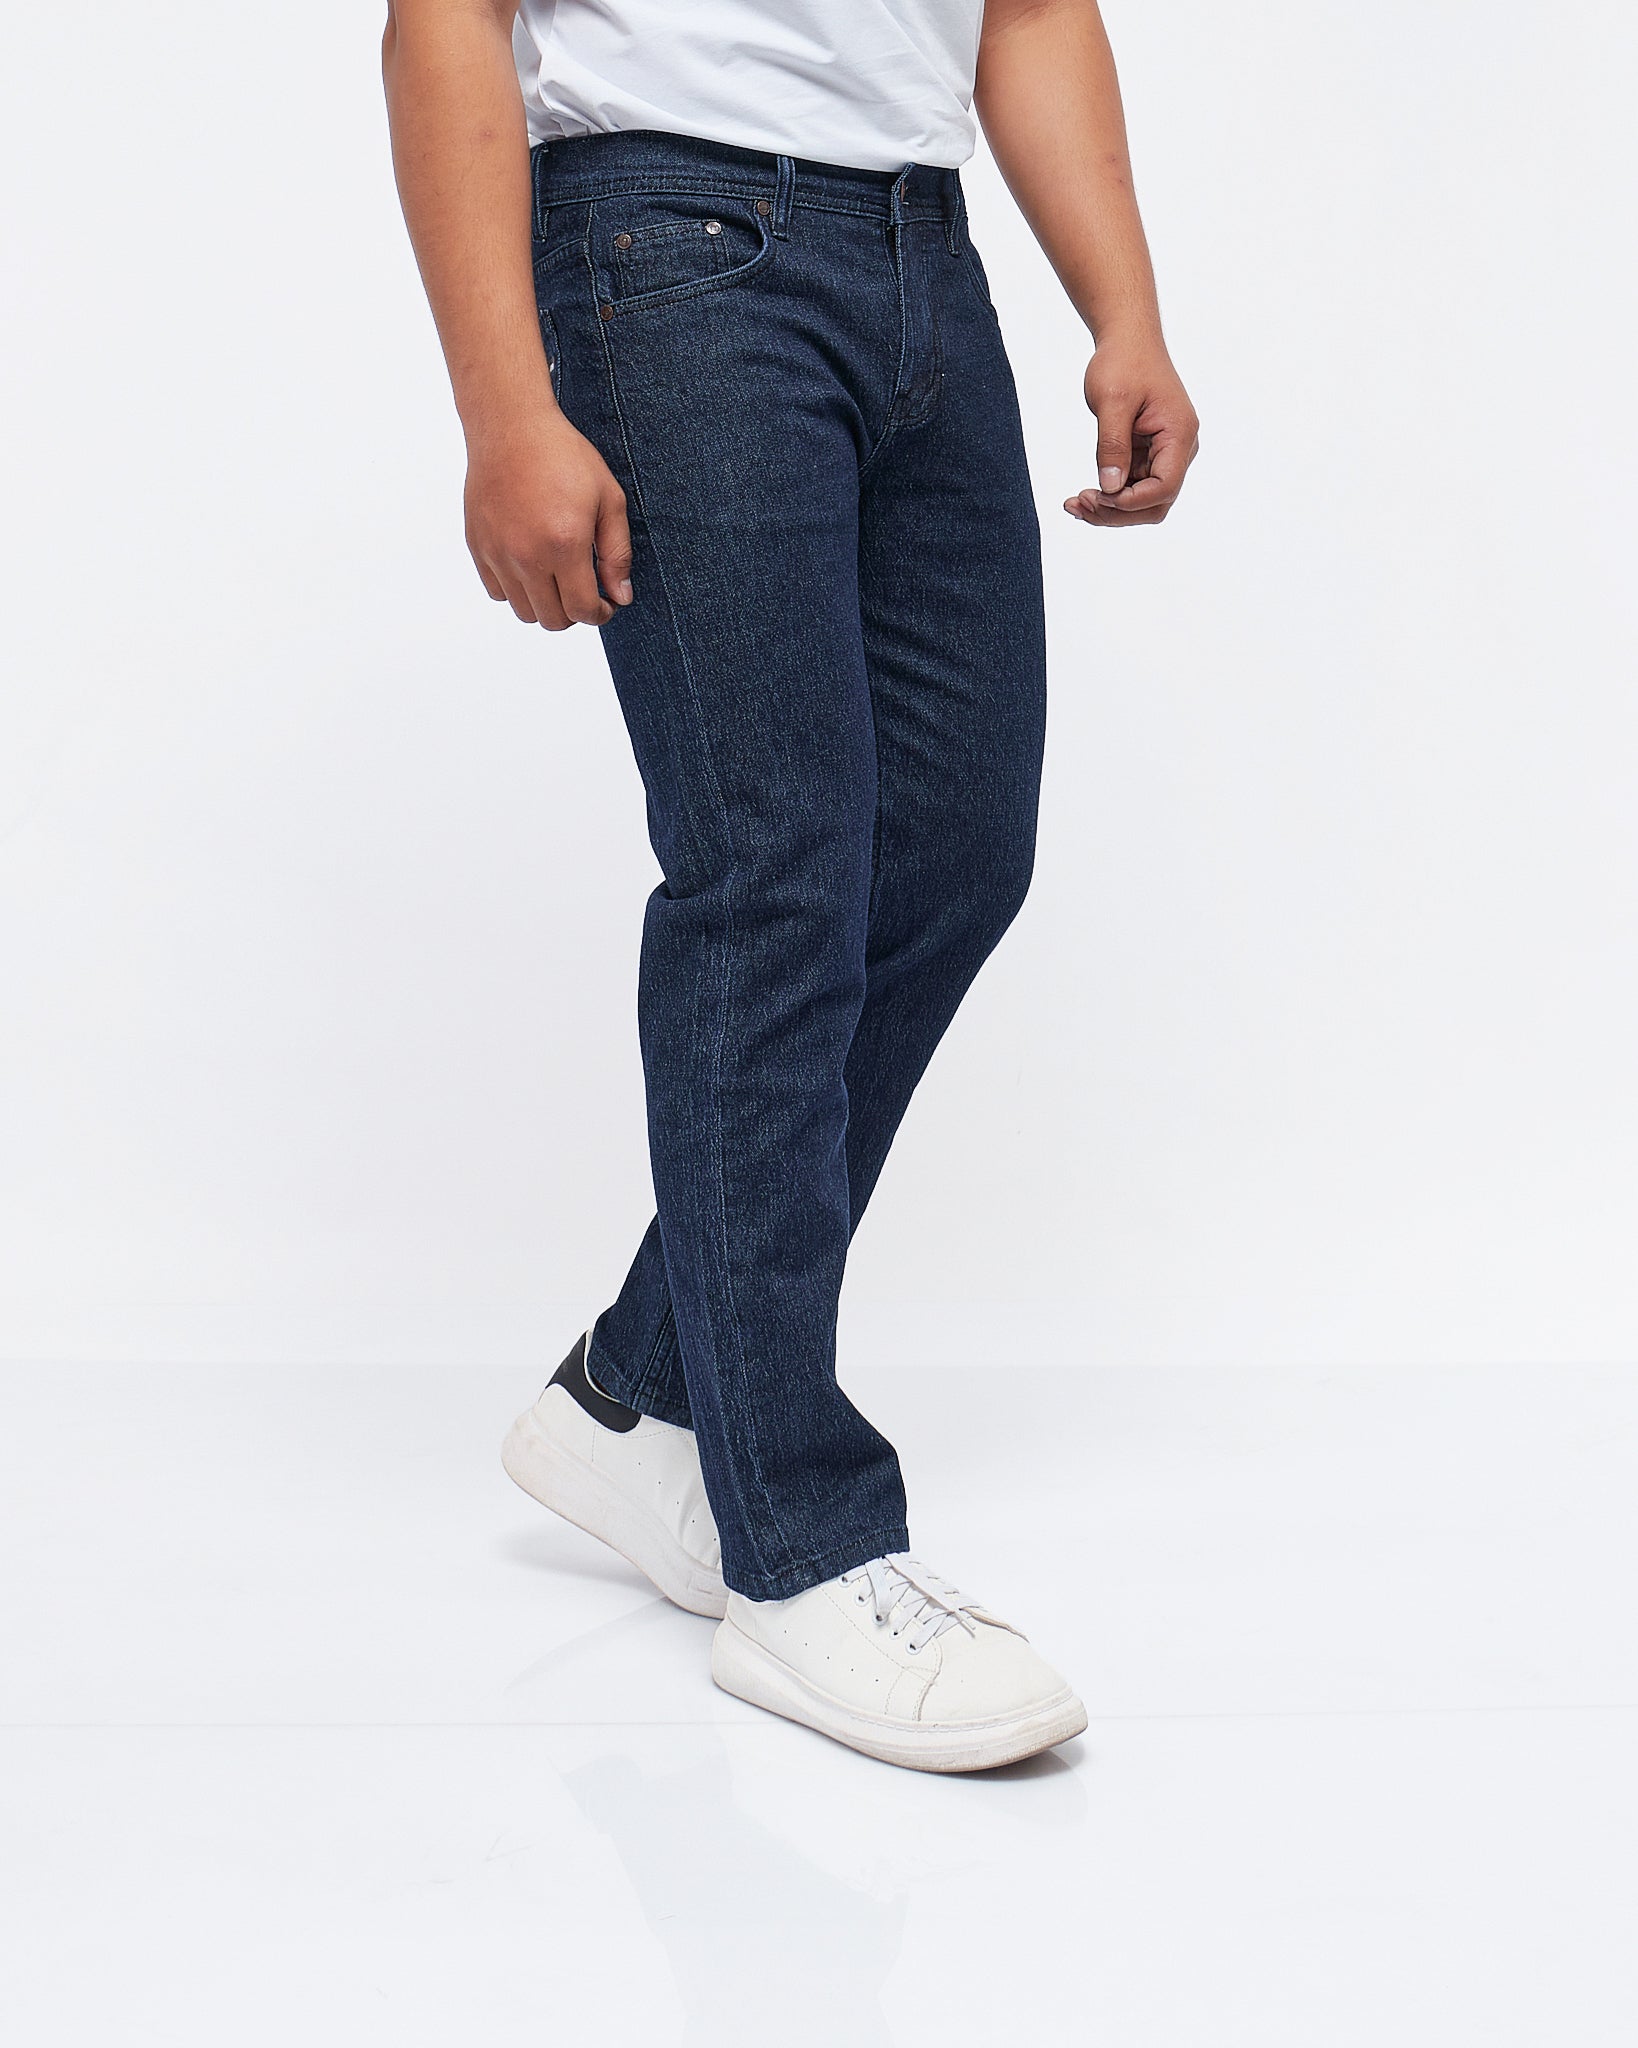 MOI OUTFIT-Flag Embroidered Slim Fit Men Jeans 24.90